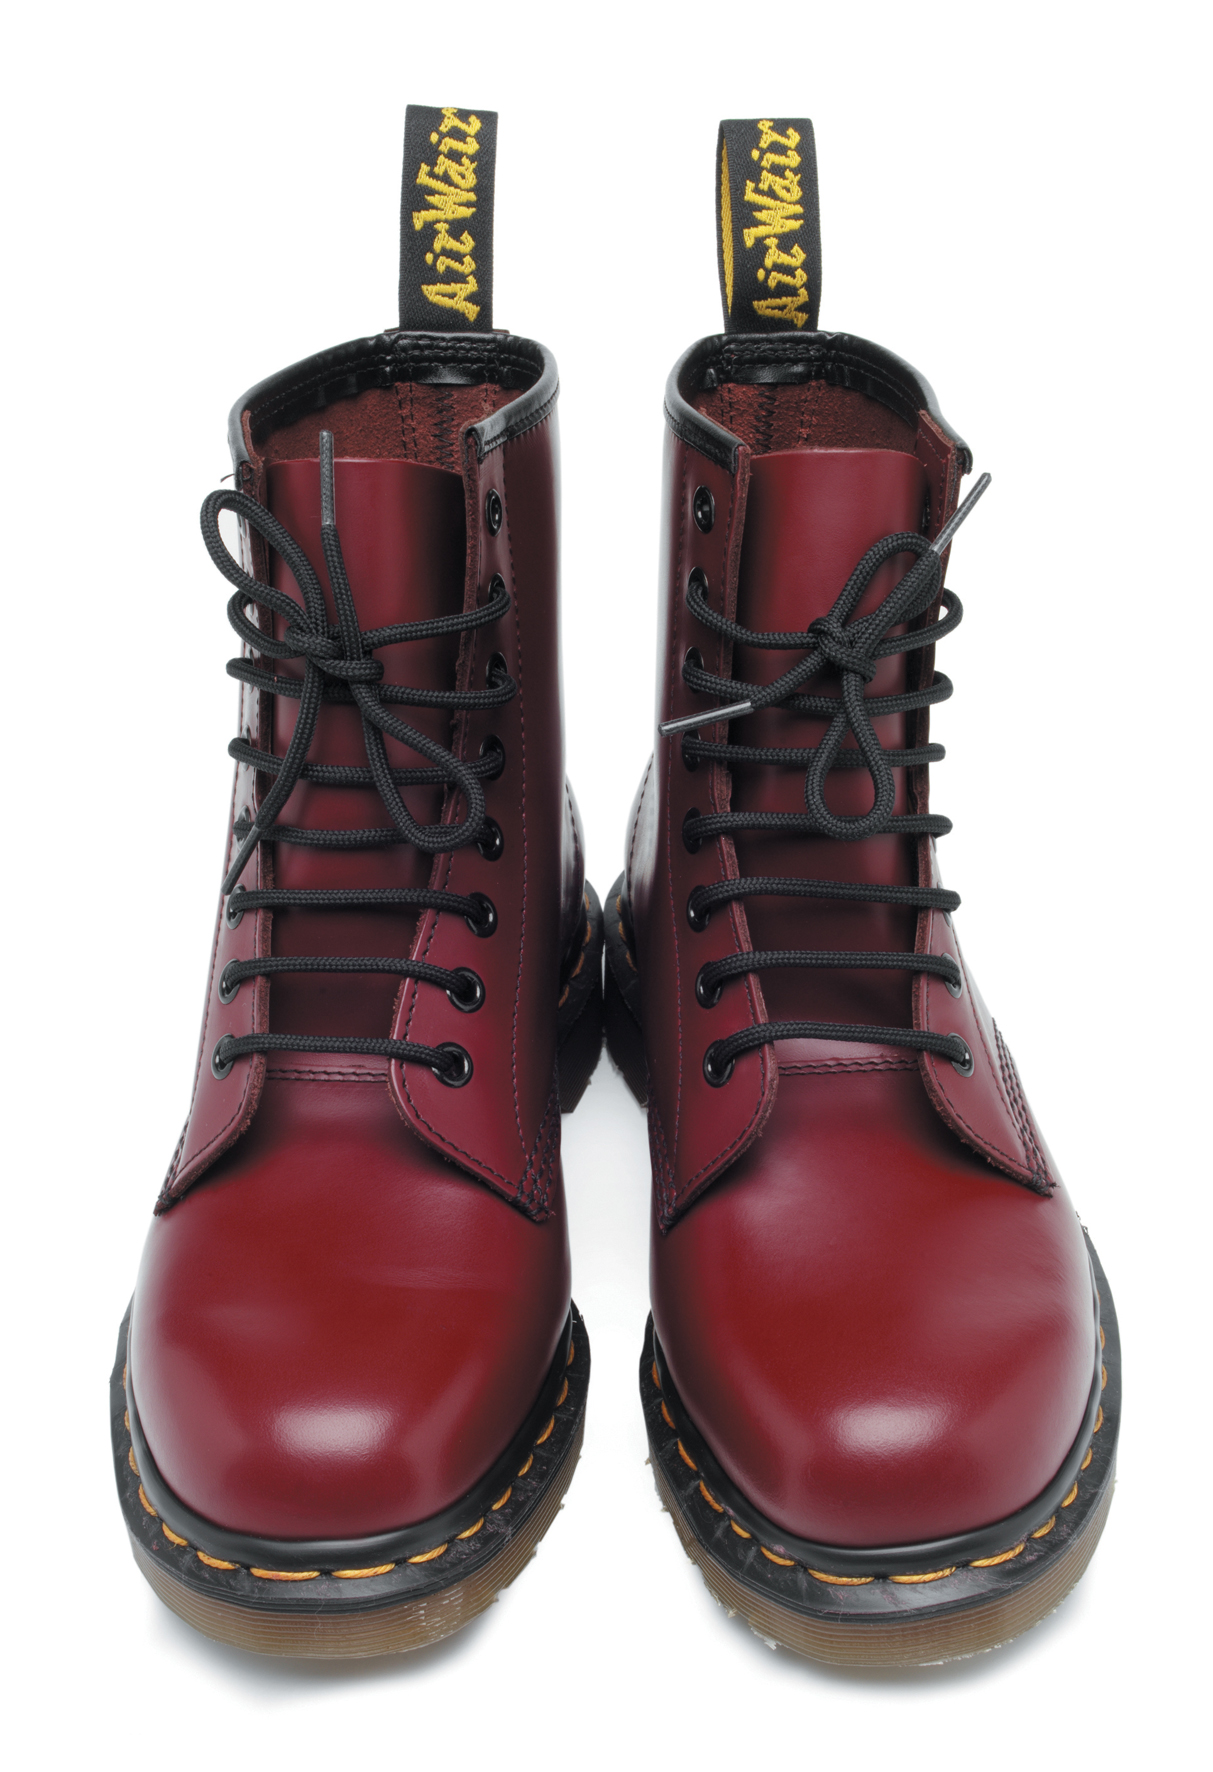 dr. marten's 1460 8-eyelet boots in cherry red | Boots, Dr martens boots,  Dm boots